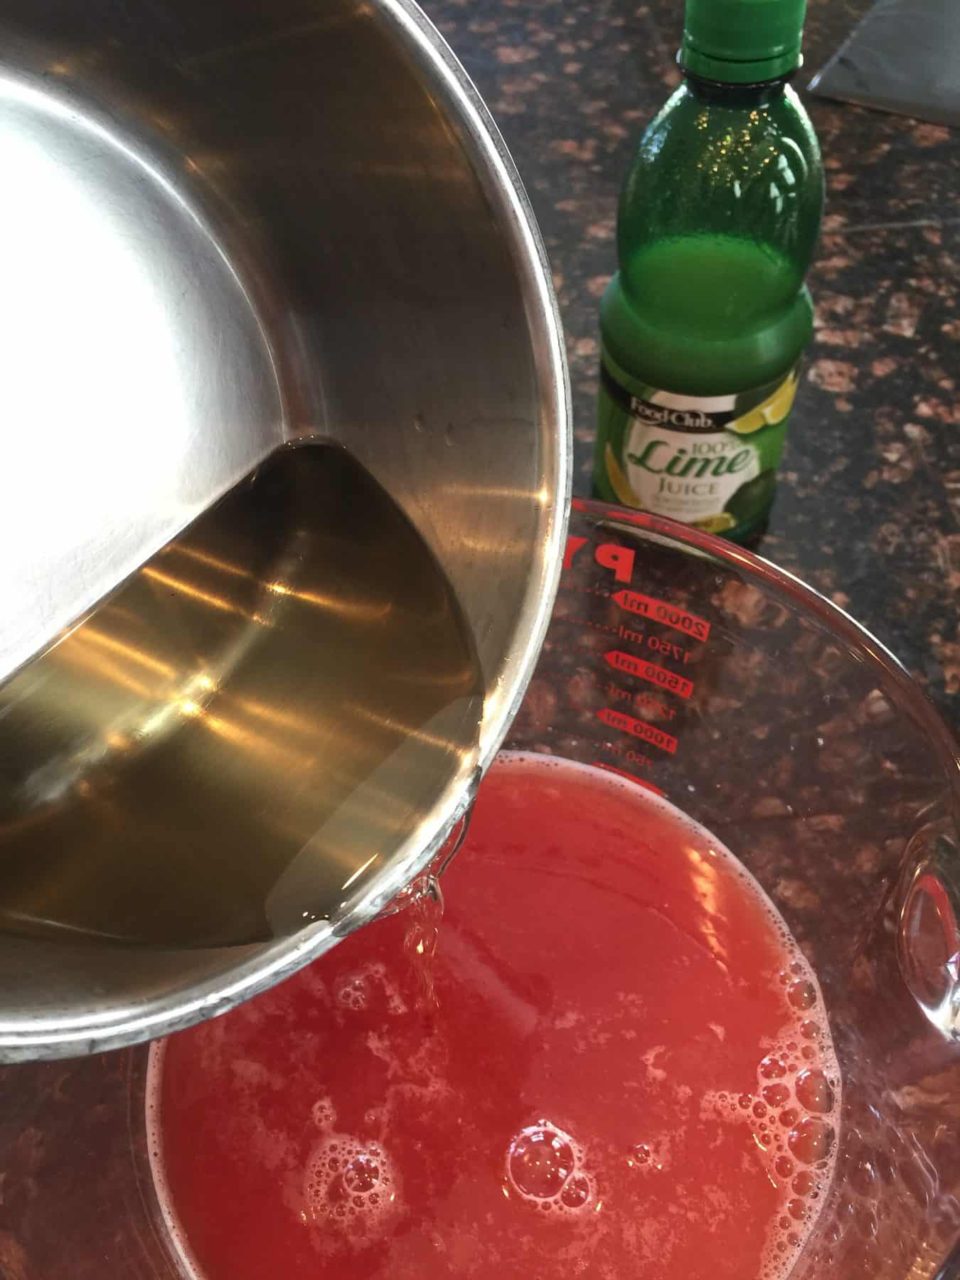 Picture of simple syrup being added to watermelon juice for Watermelon Lime Sorbet.  Lime juice pictured in the background